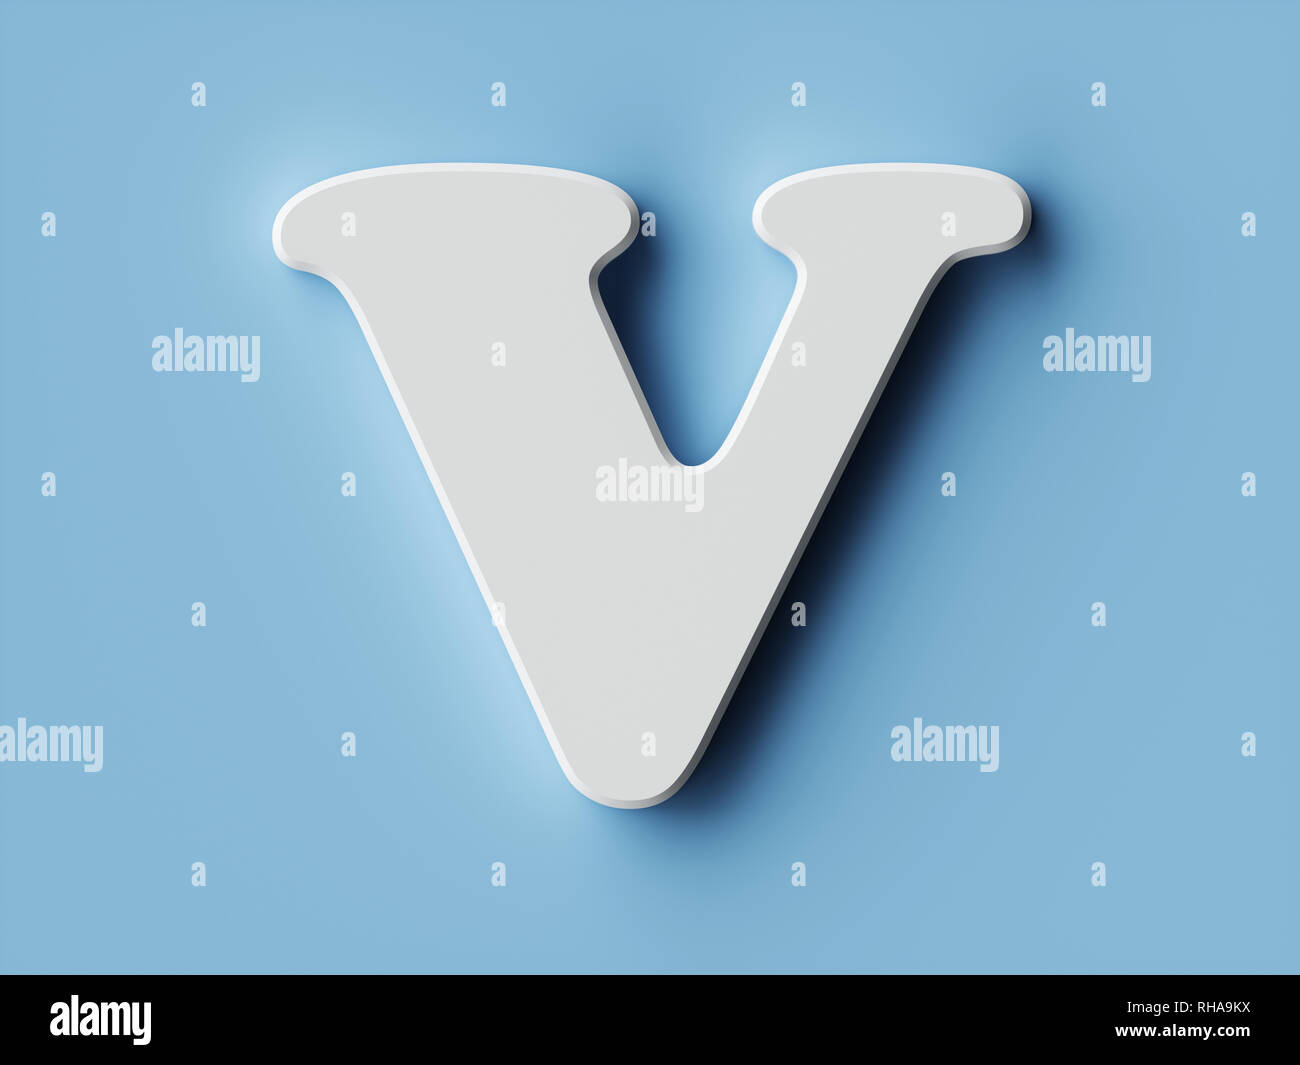 White Paper Letter Alphabet Character V Font Front View Capital Symbol On A Blue Background 3d Rendering Illustration Stock Photo Alamy